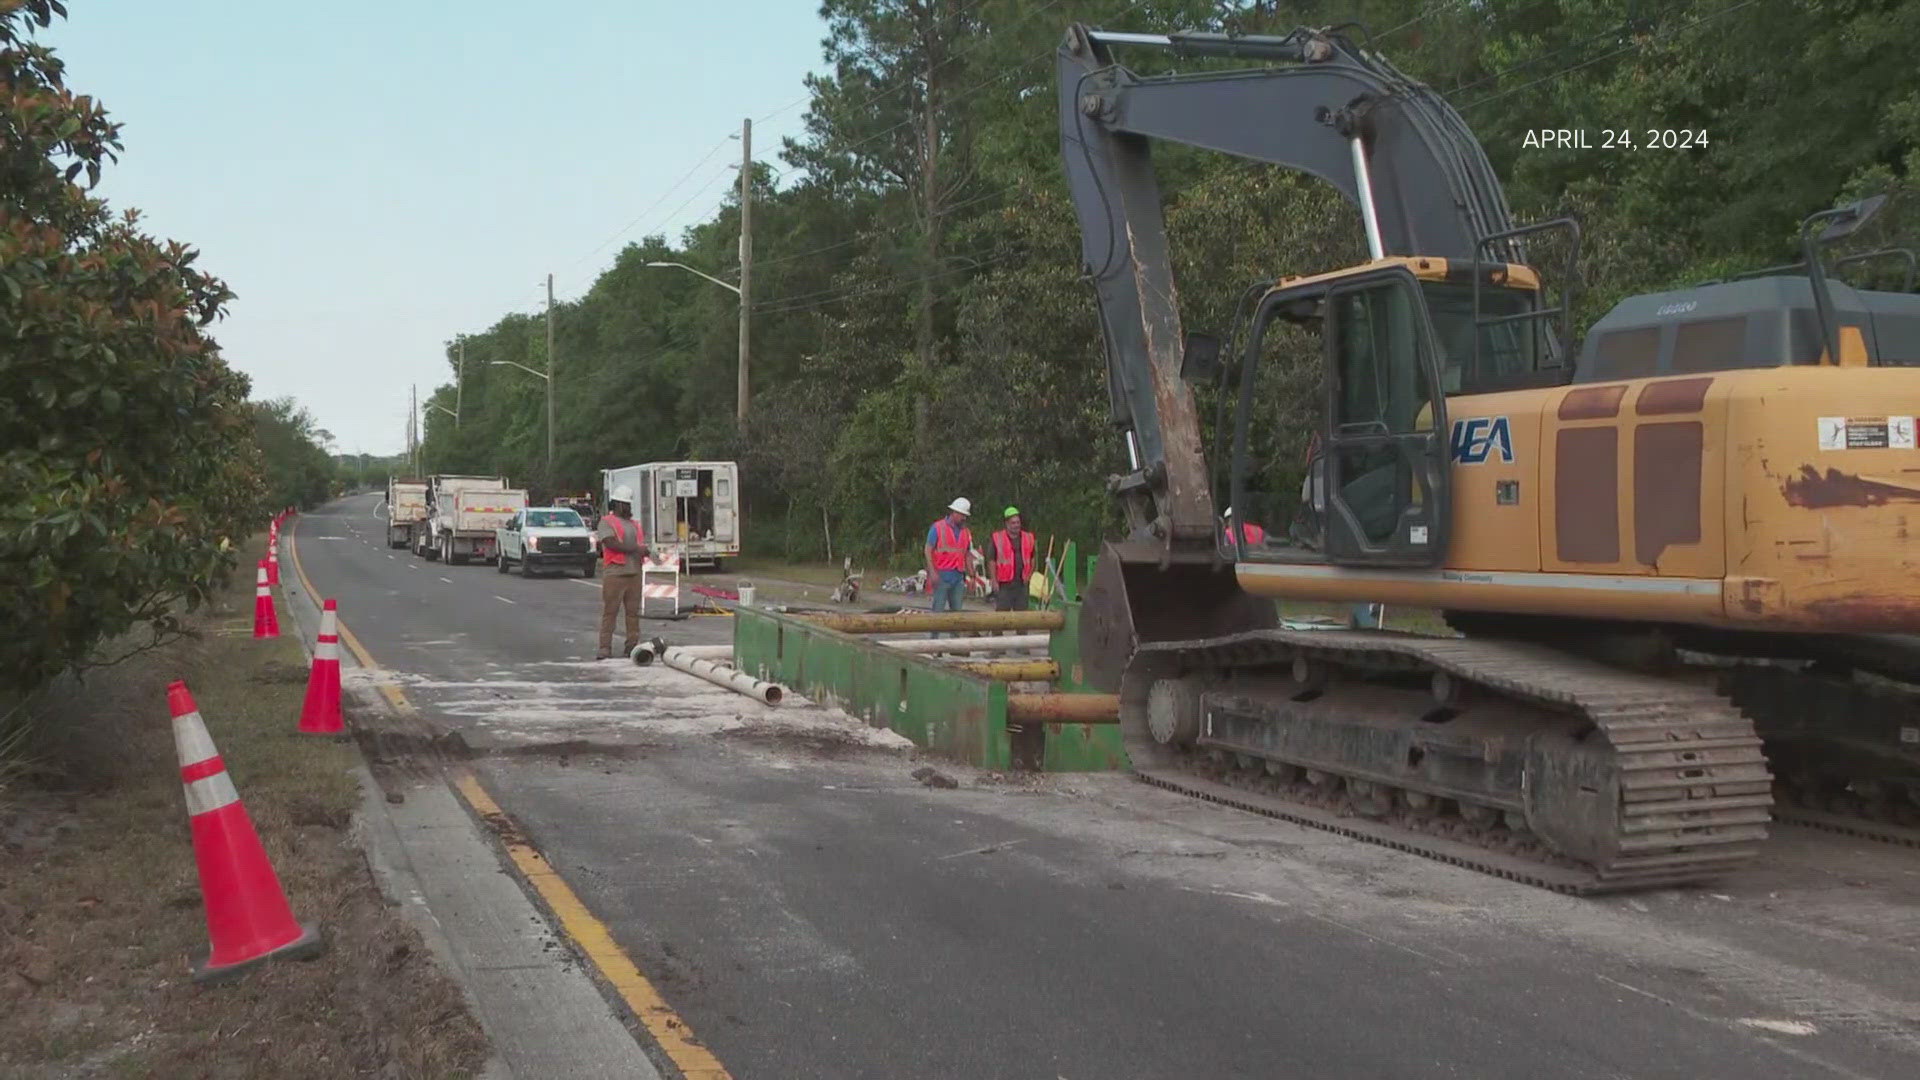 The Florida Department of Transportation previously said that drivers should expect closures in the area through early May.